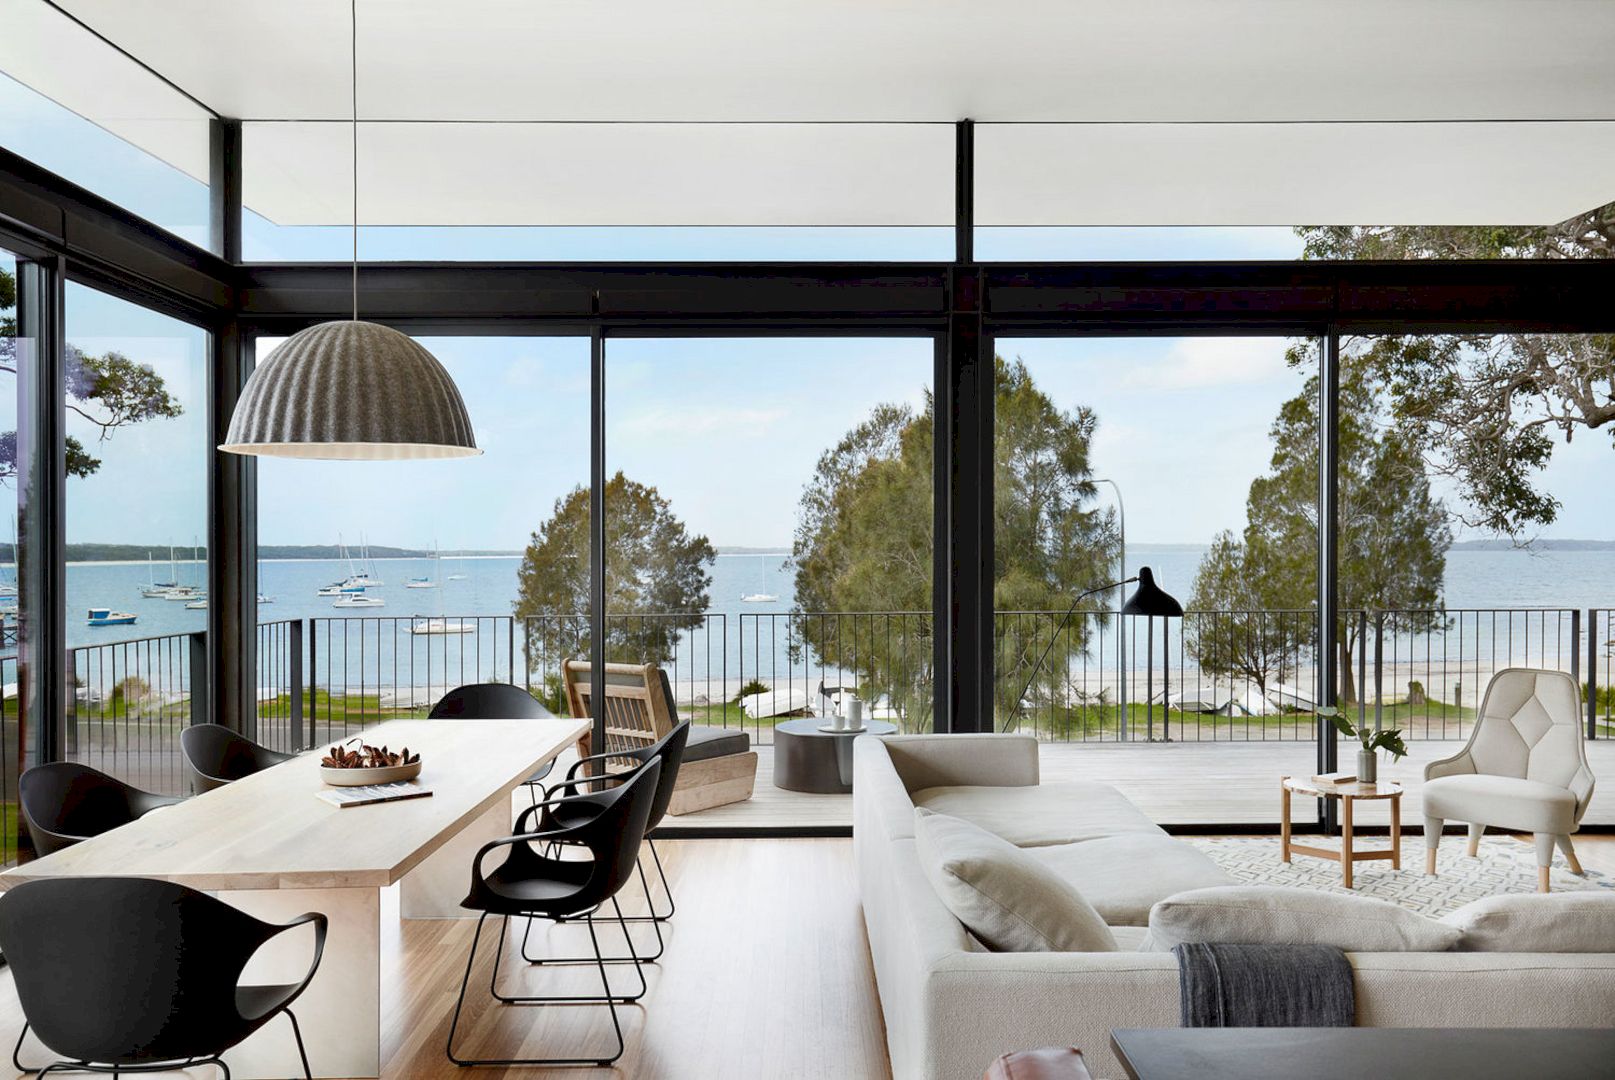 Bay House: A Glazed Steel Frame Pavilion with Maximum Transparency